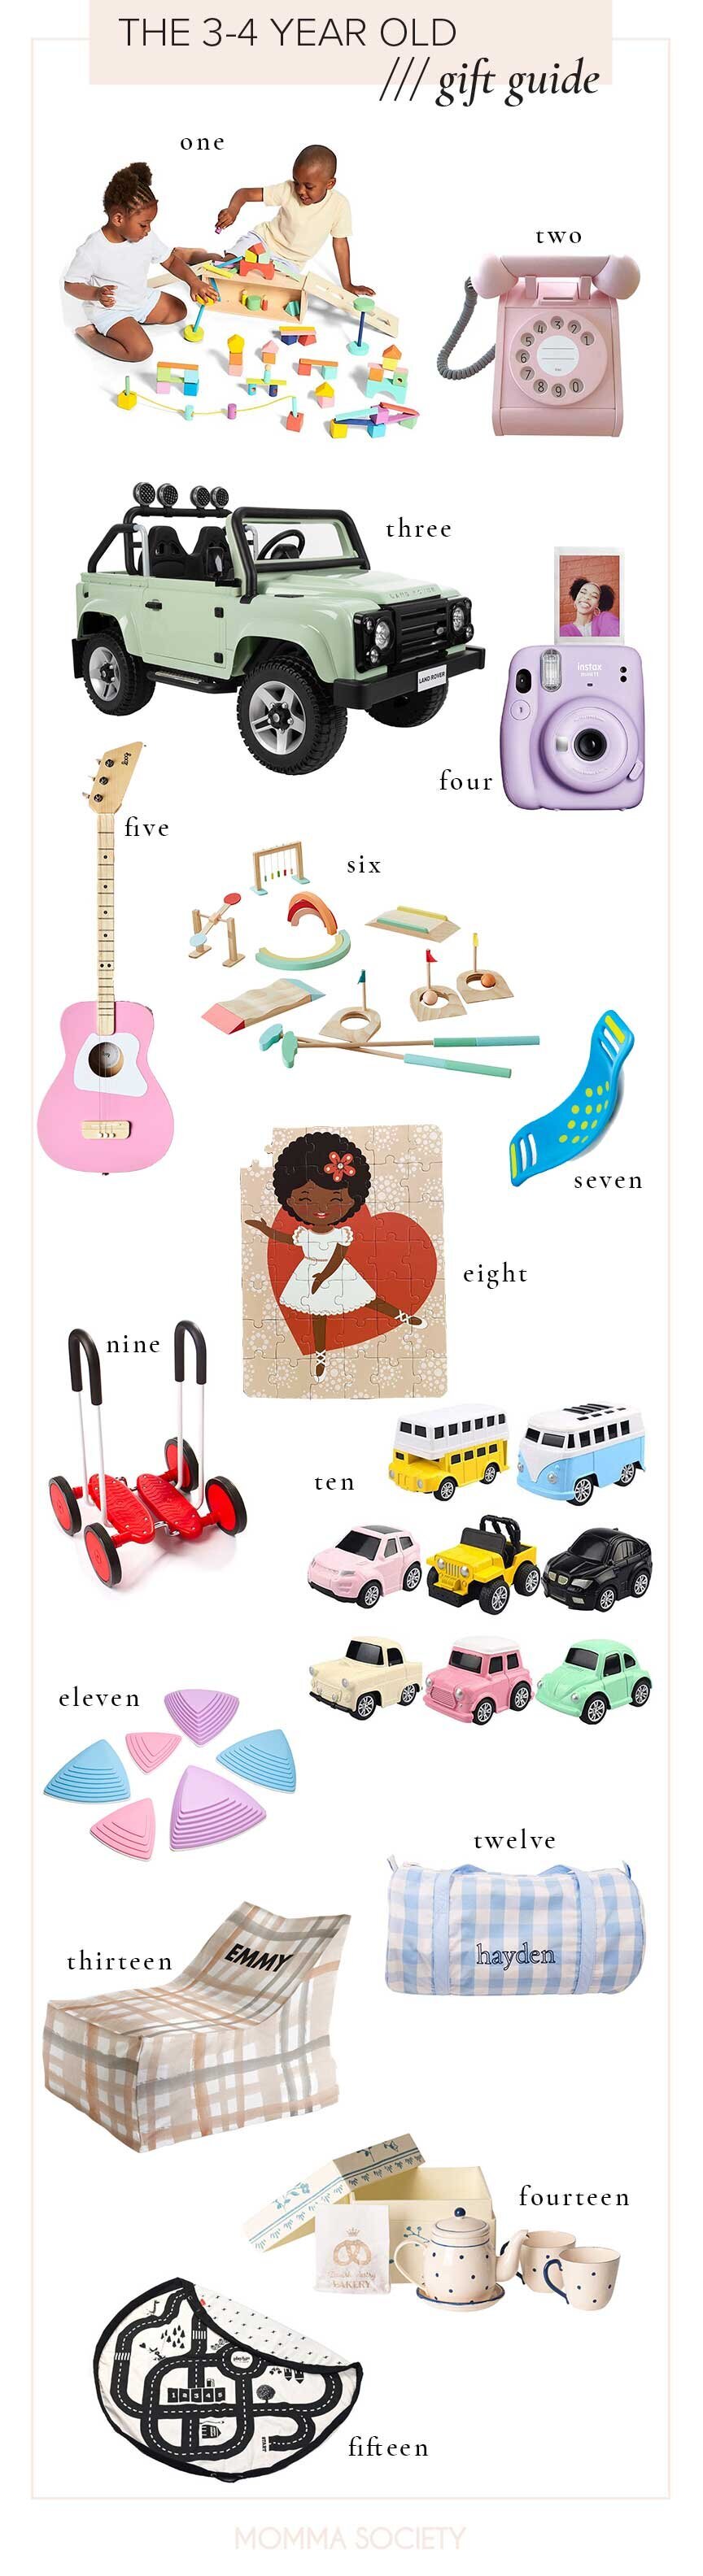 Holiday Gift Guide: Best Gifts for Kids